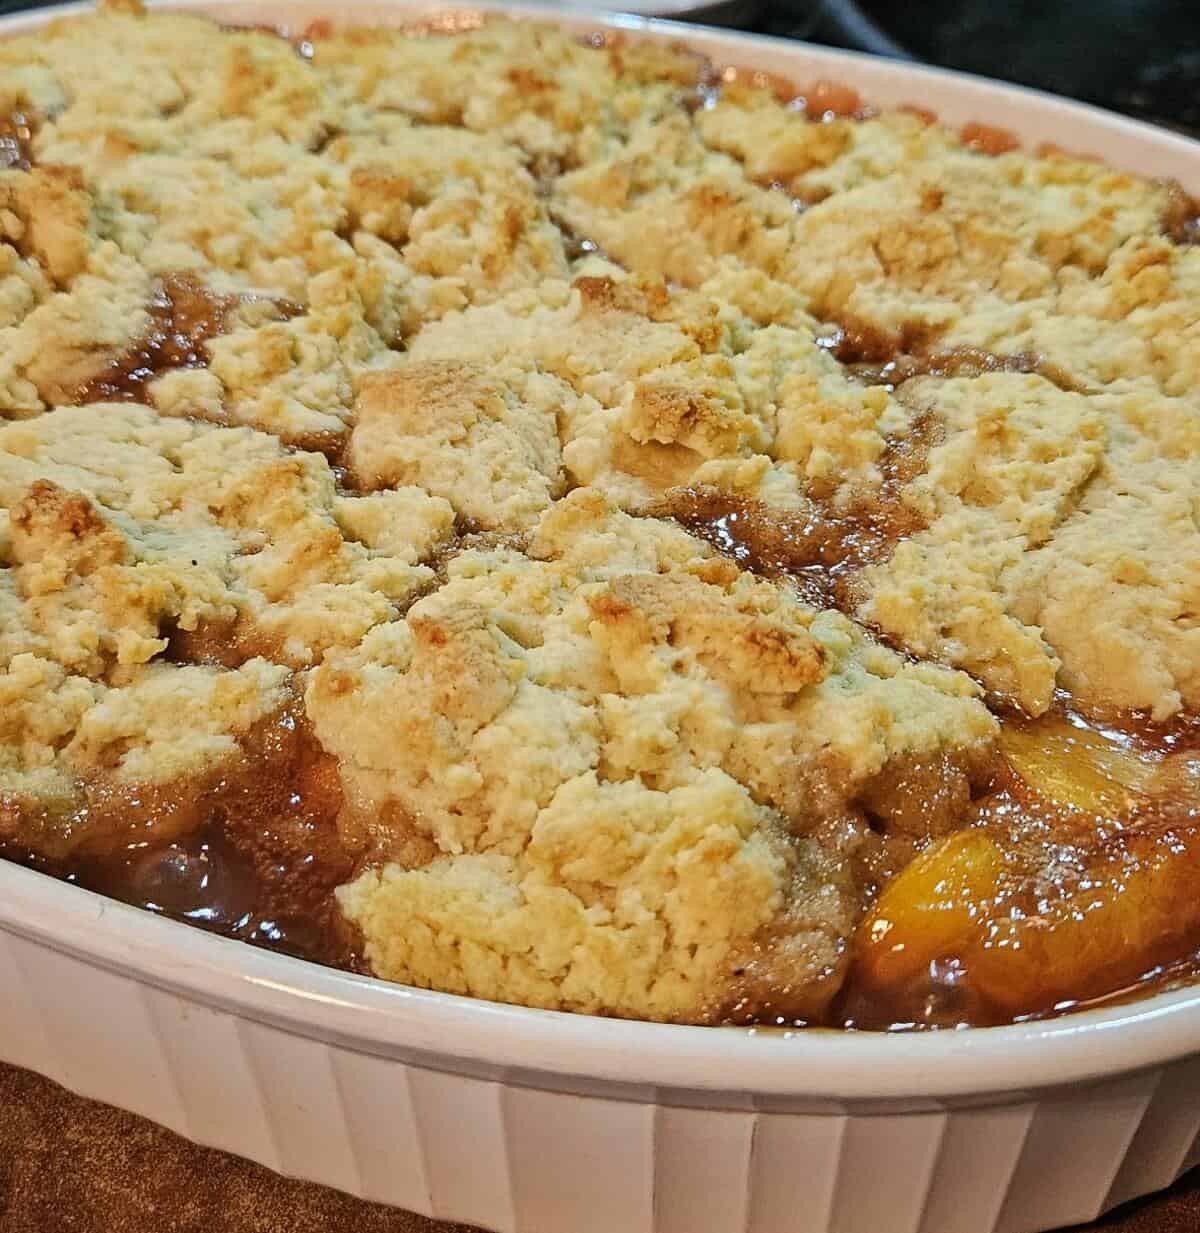 finished, fully cooked peach cobbler in baking pan